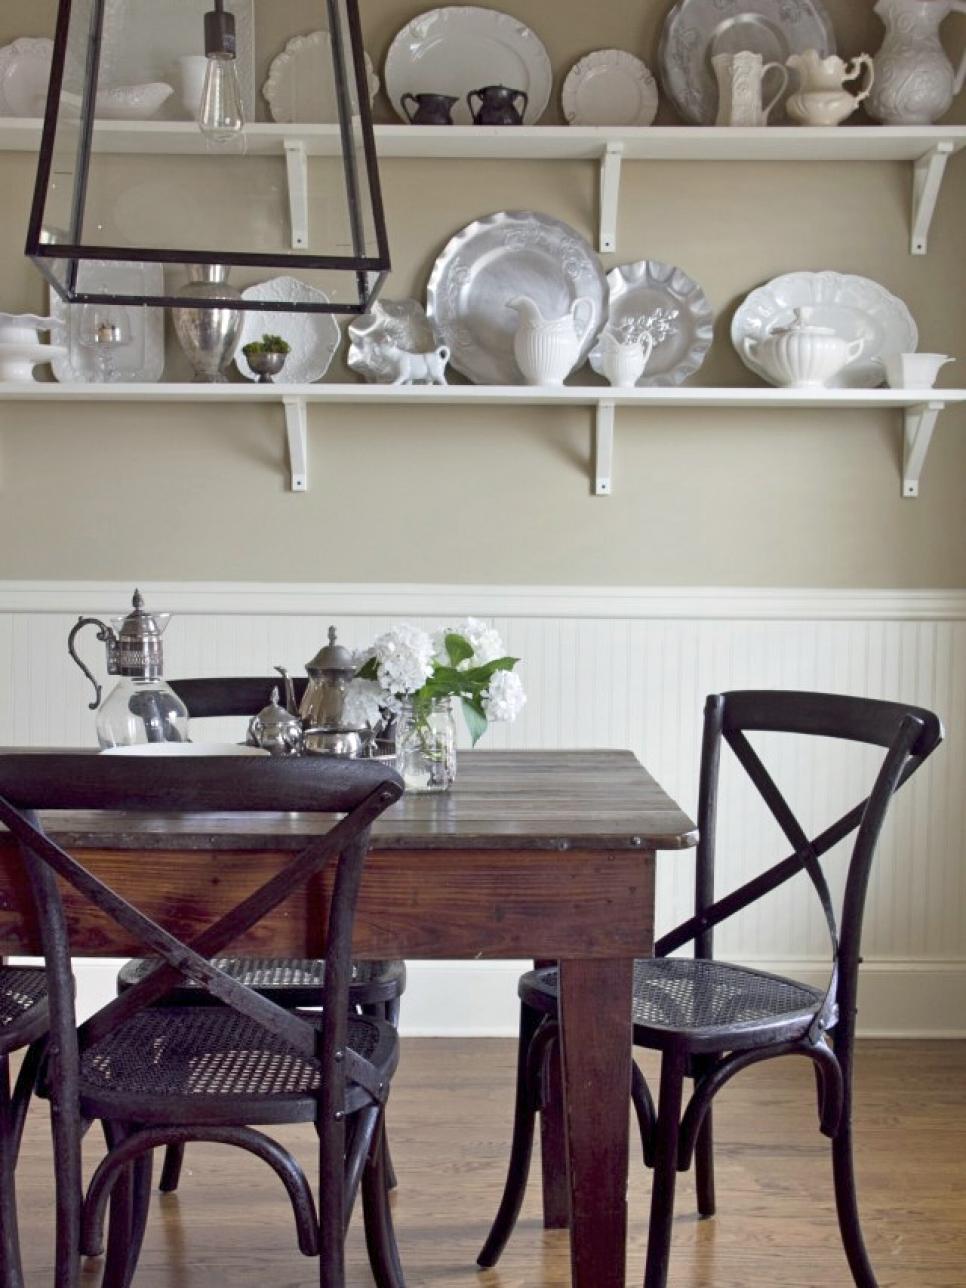 Breakfast Nook with Classic Shelving